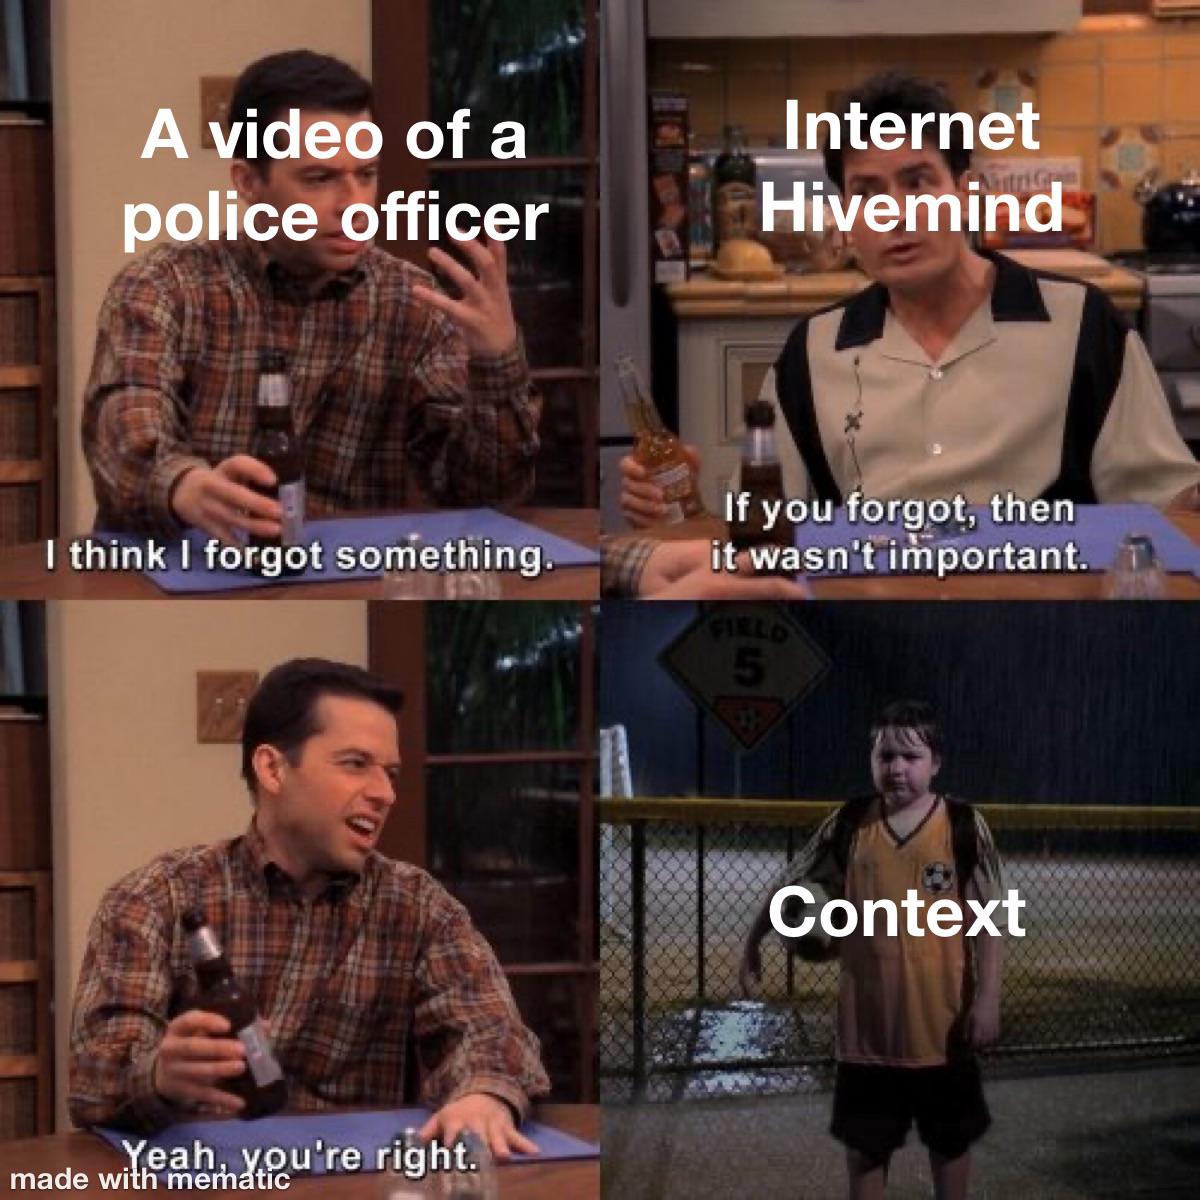 two and a half men memes - A video of a police officer Internet Hivemind Gm I think I forgot something If you forgot, then it wasn't important. Ti Fields 5 Context Yeah, you're right. made with mematic